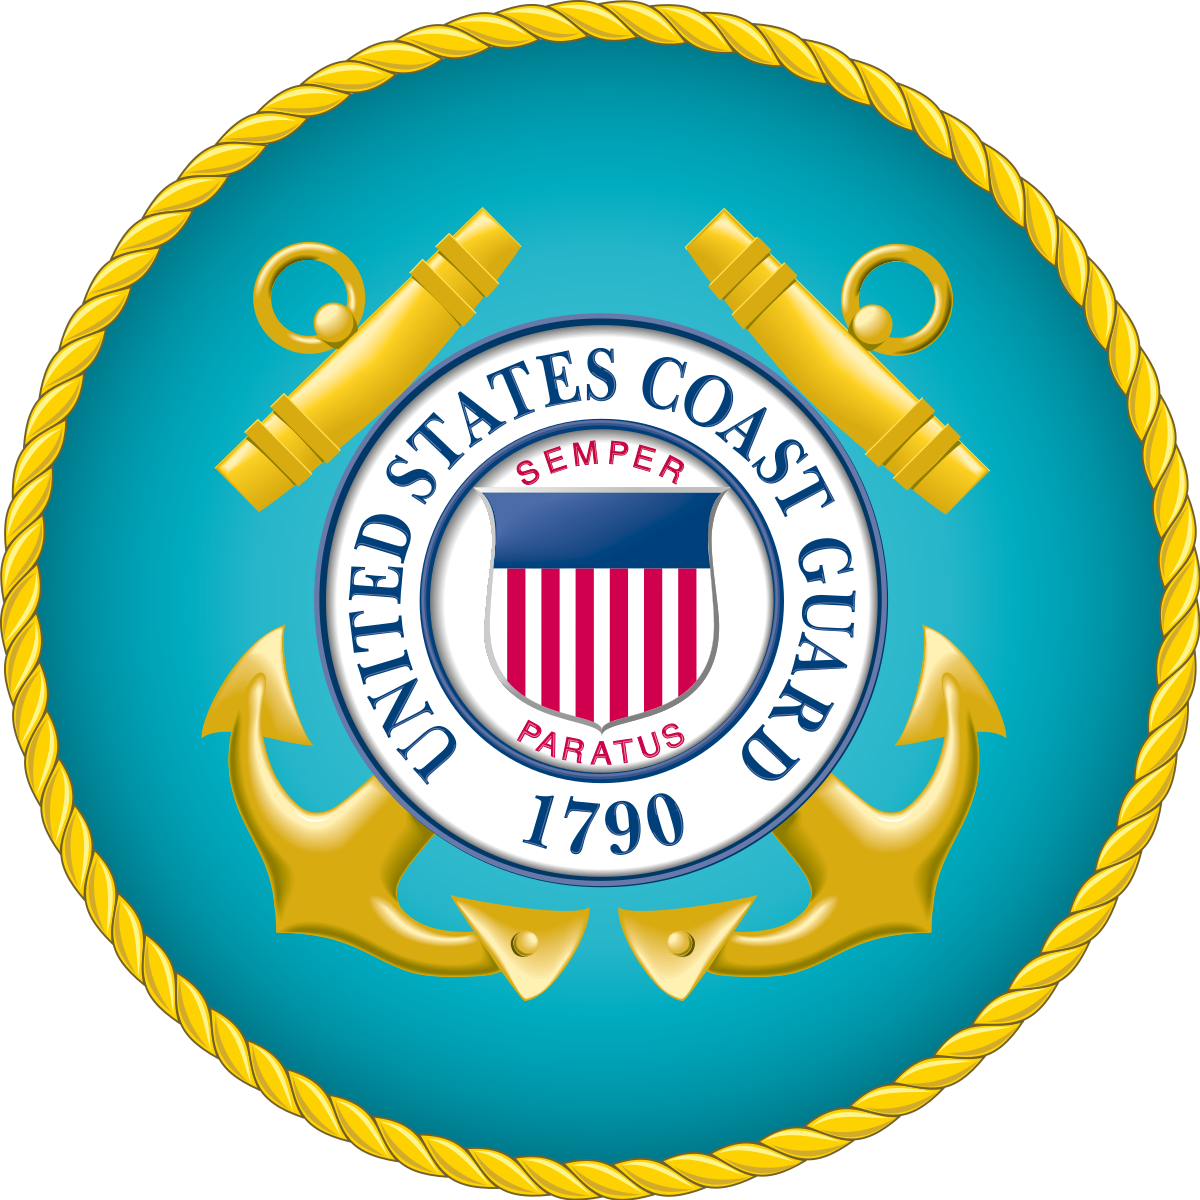 1200px-Seal_of_the_United_States_Coast_Guard.svg.png